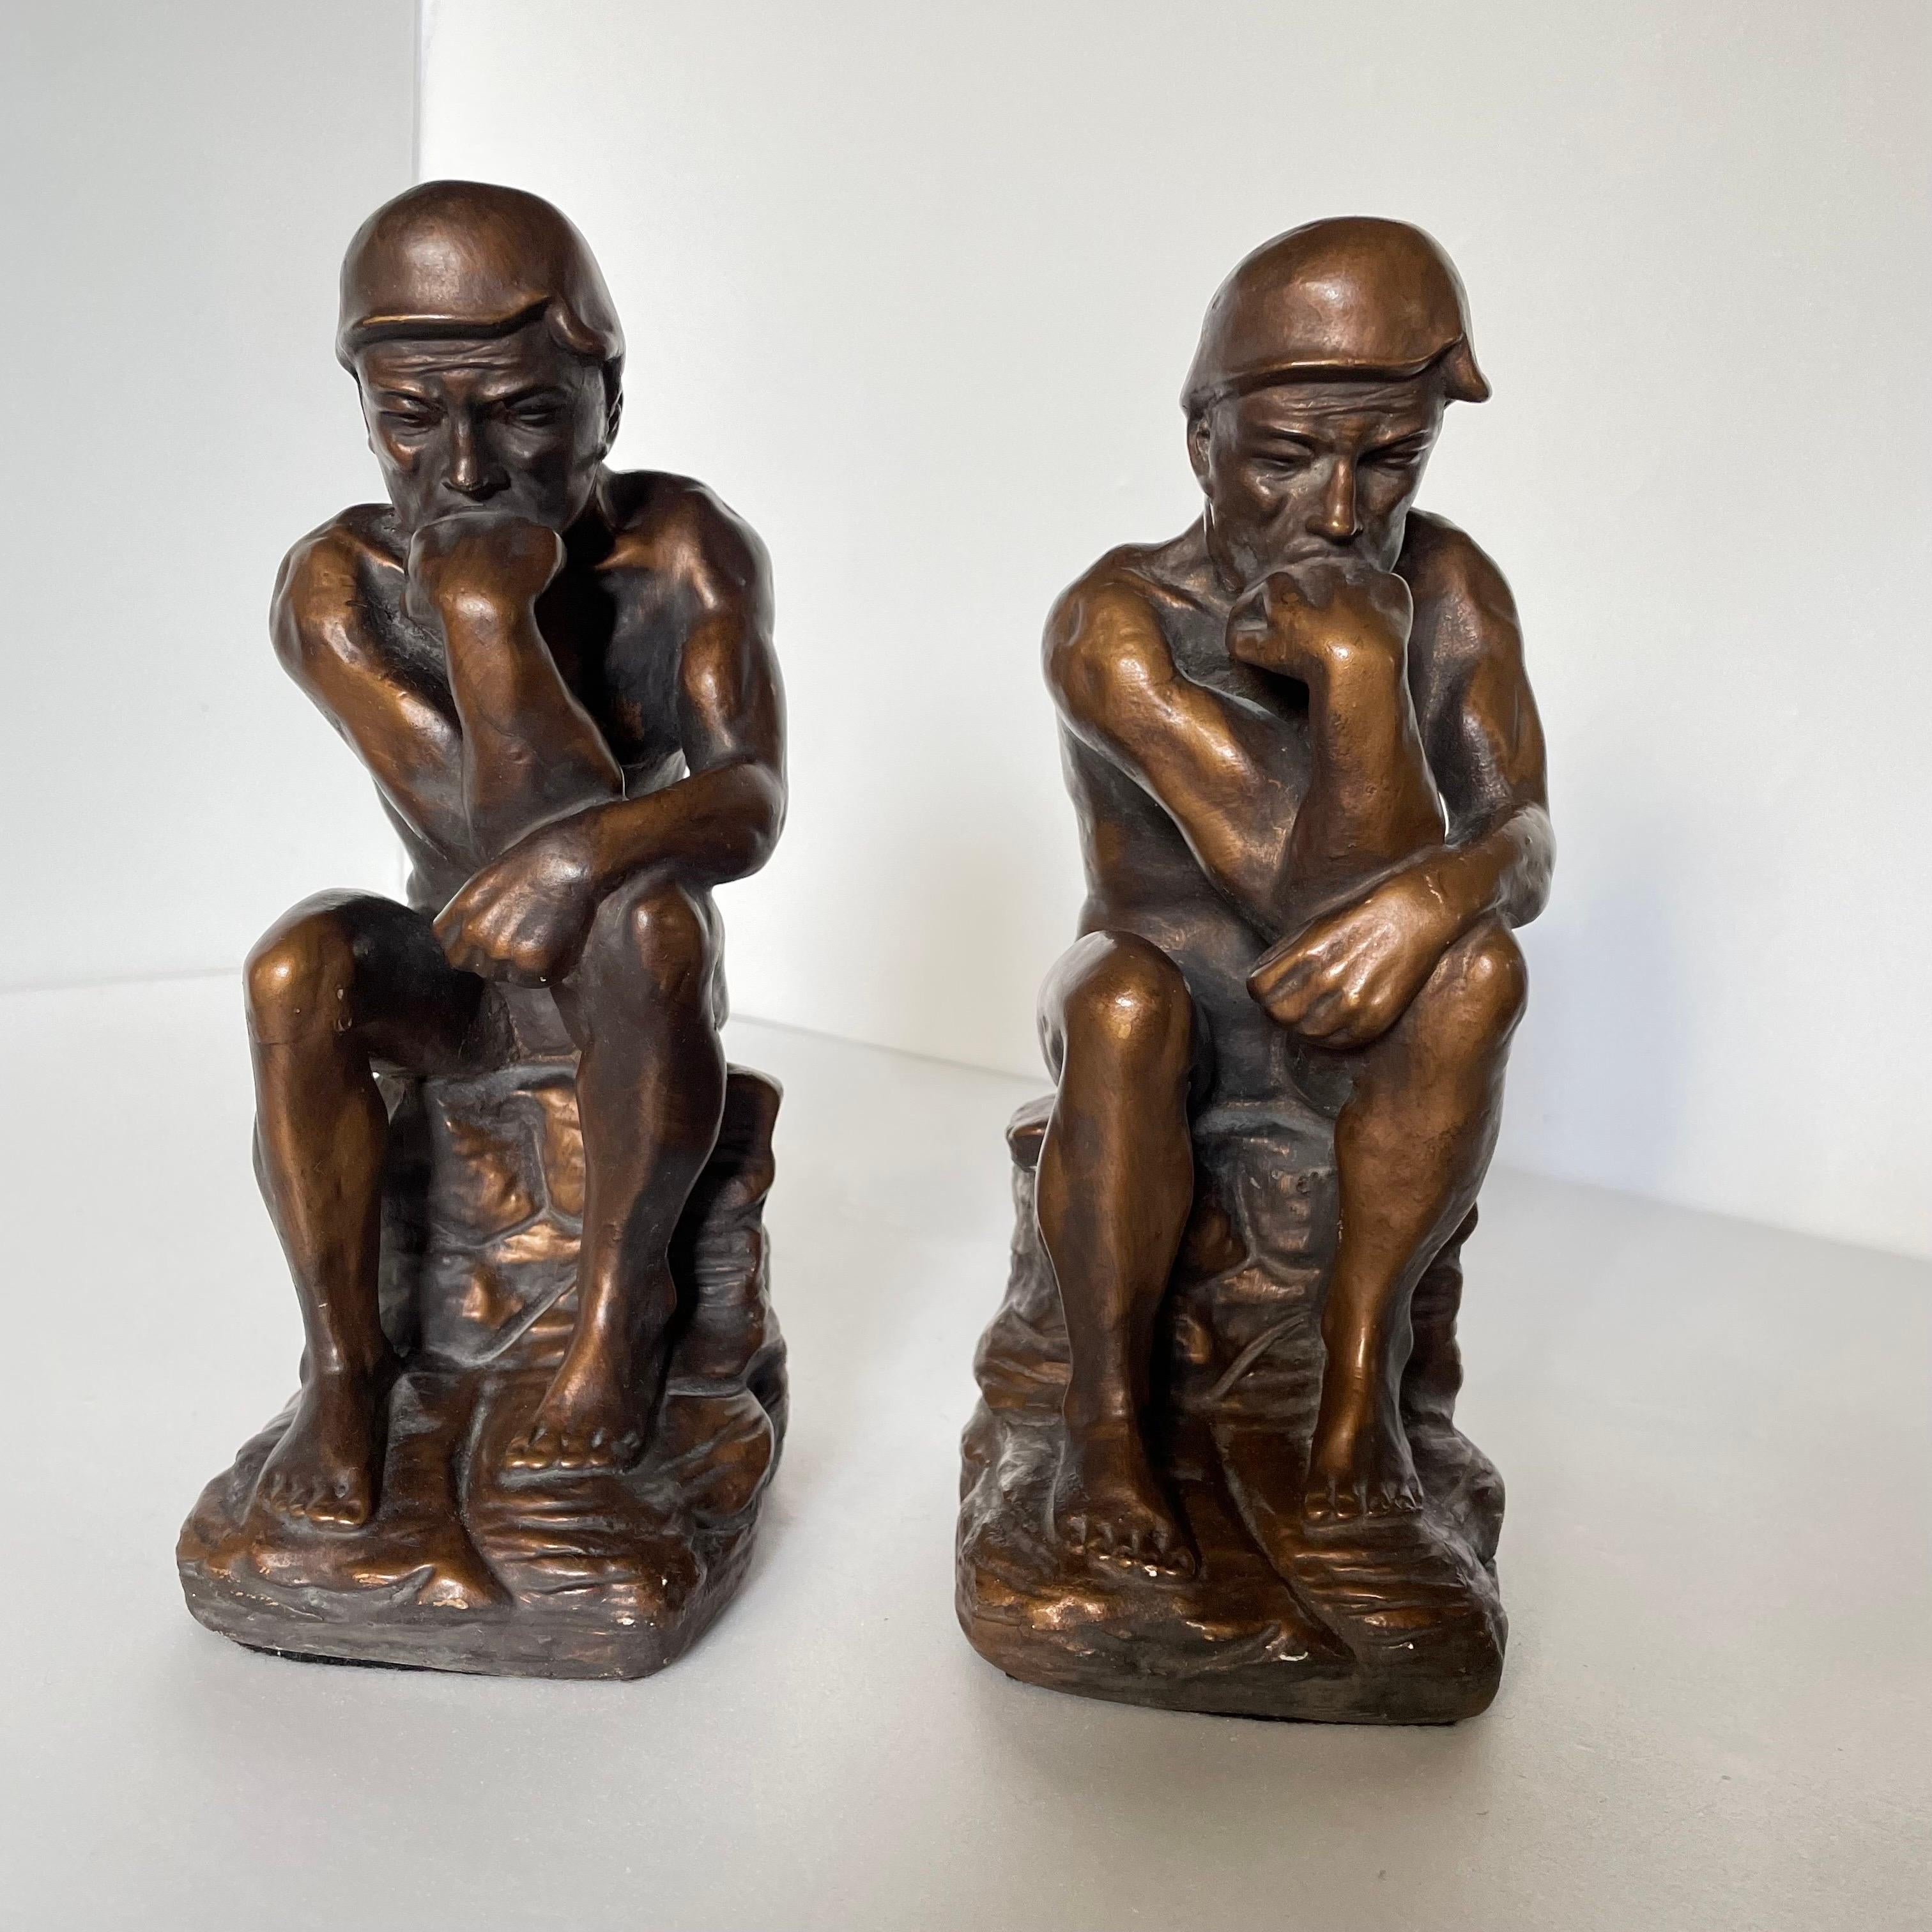 Pair of vintage chalk ware Thinking Man bookends in a faux bronze finish. There are some minor chips on both bookends, but over all in good condition. 